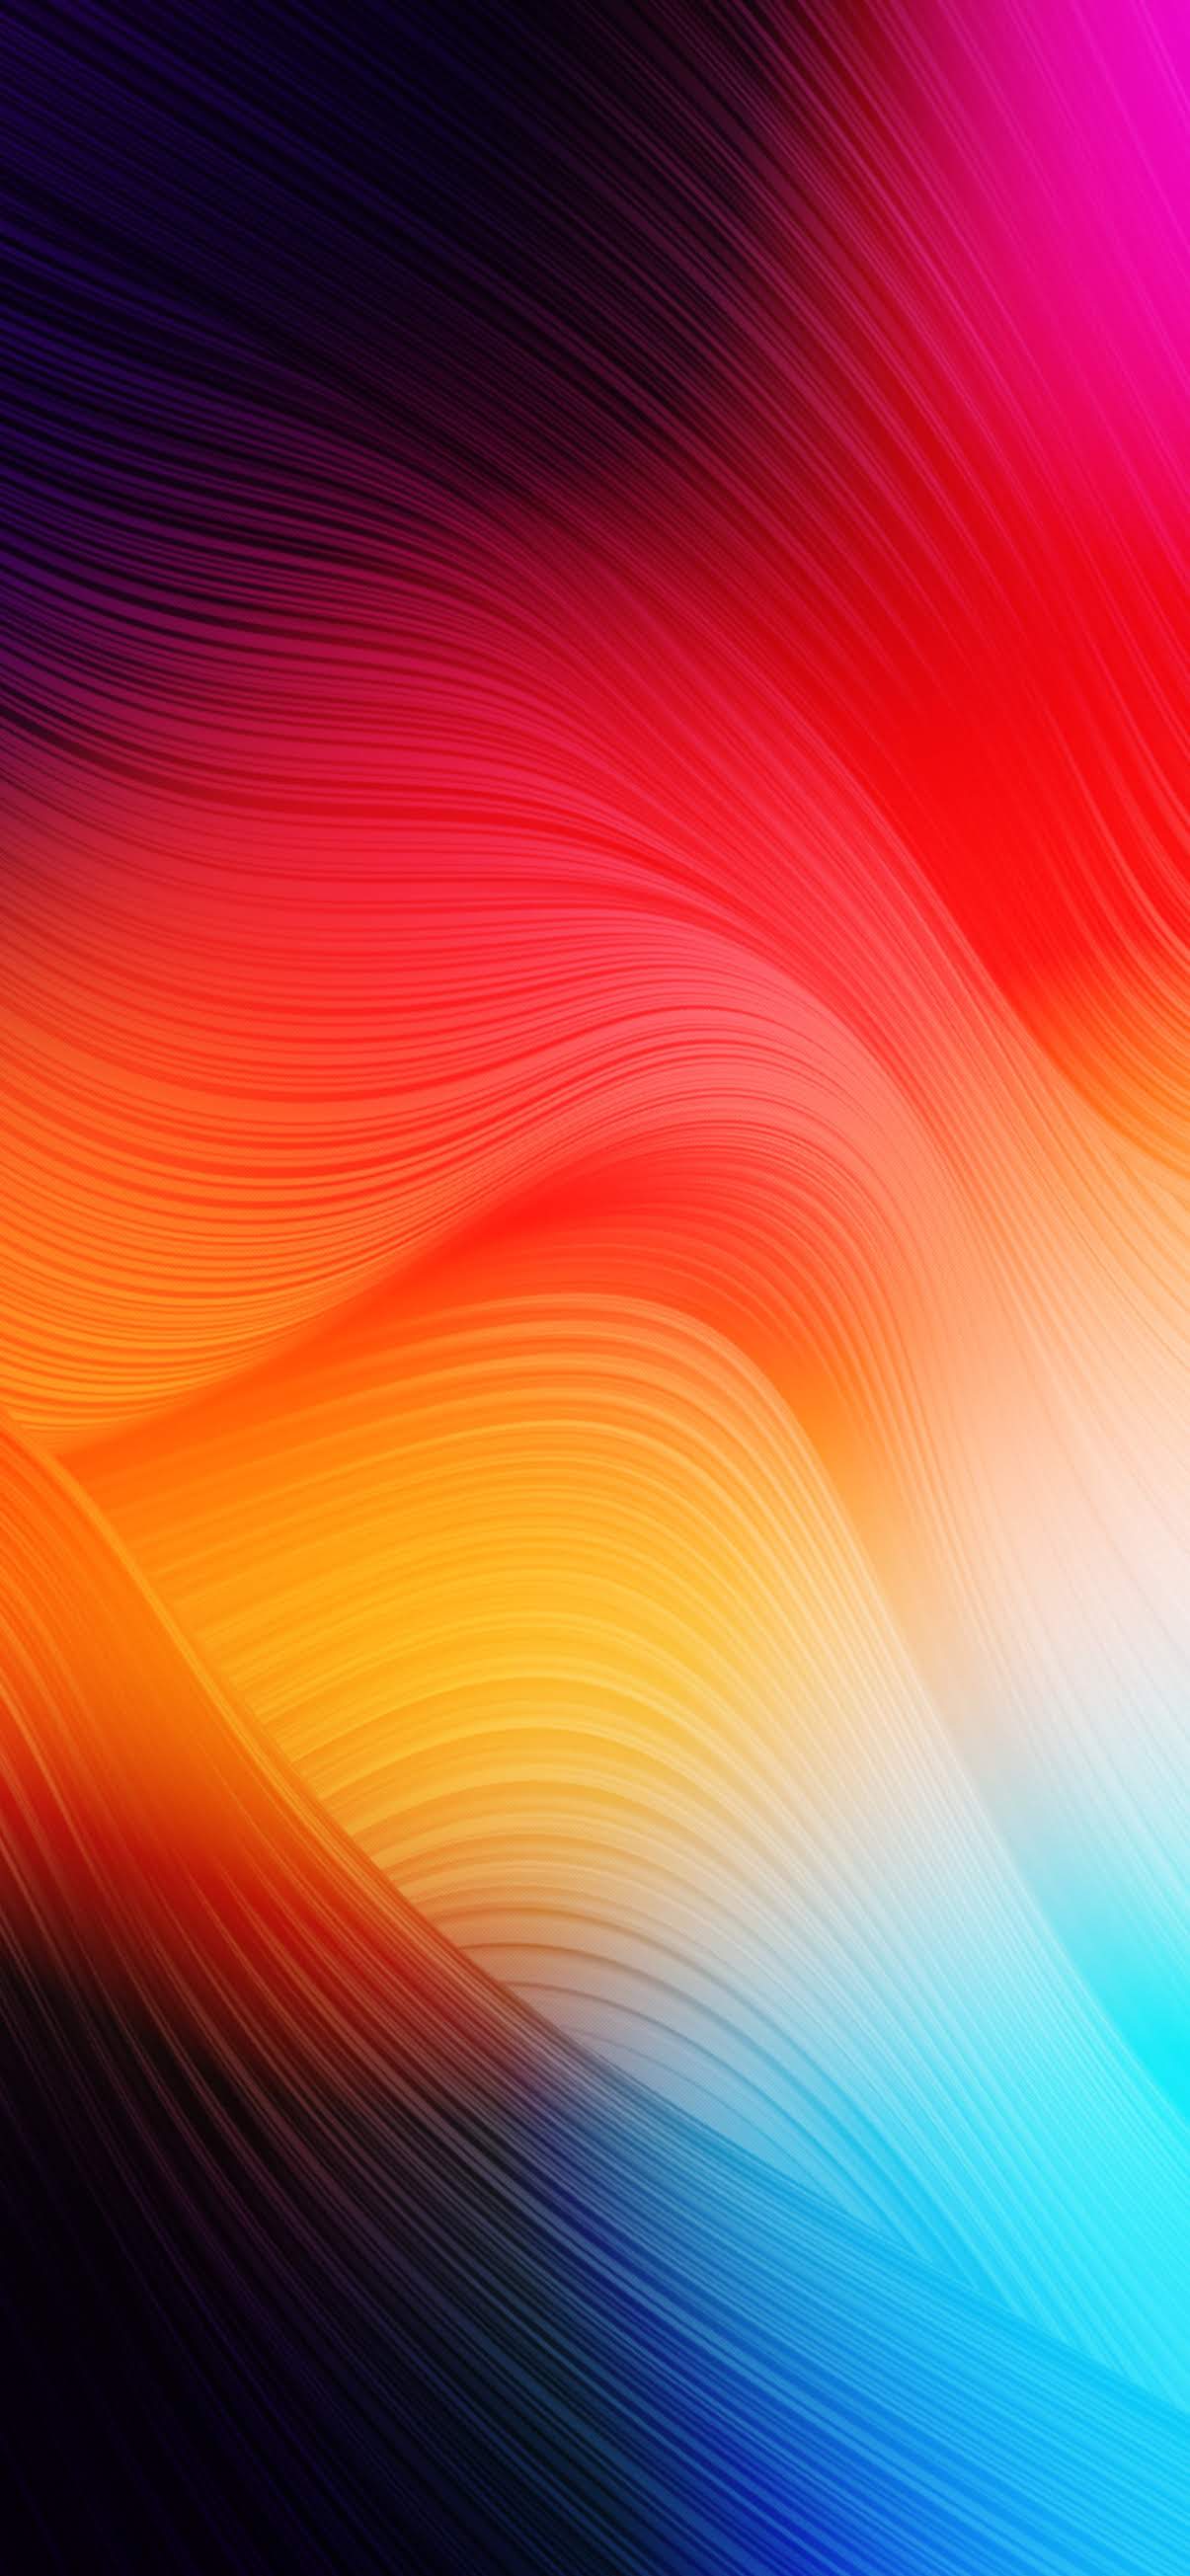 Wallpapers Iphone Xs Max Pack 2